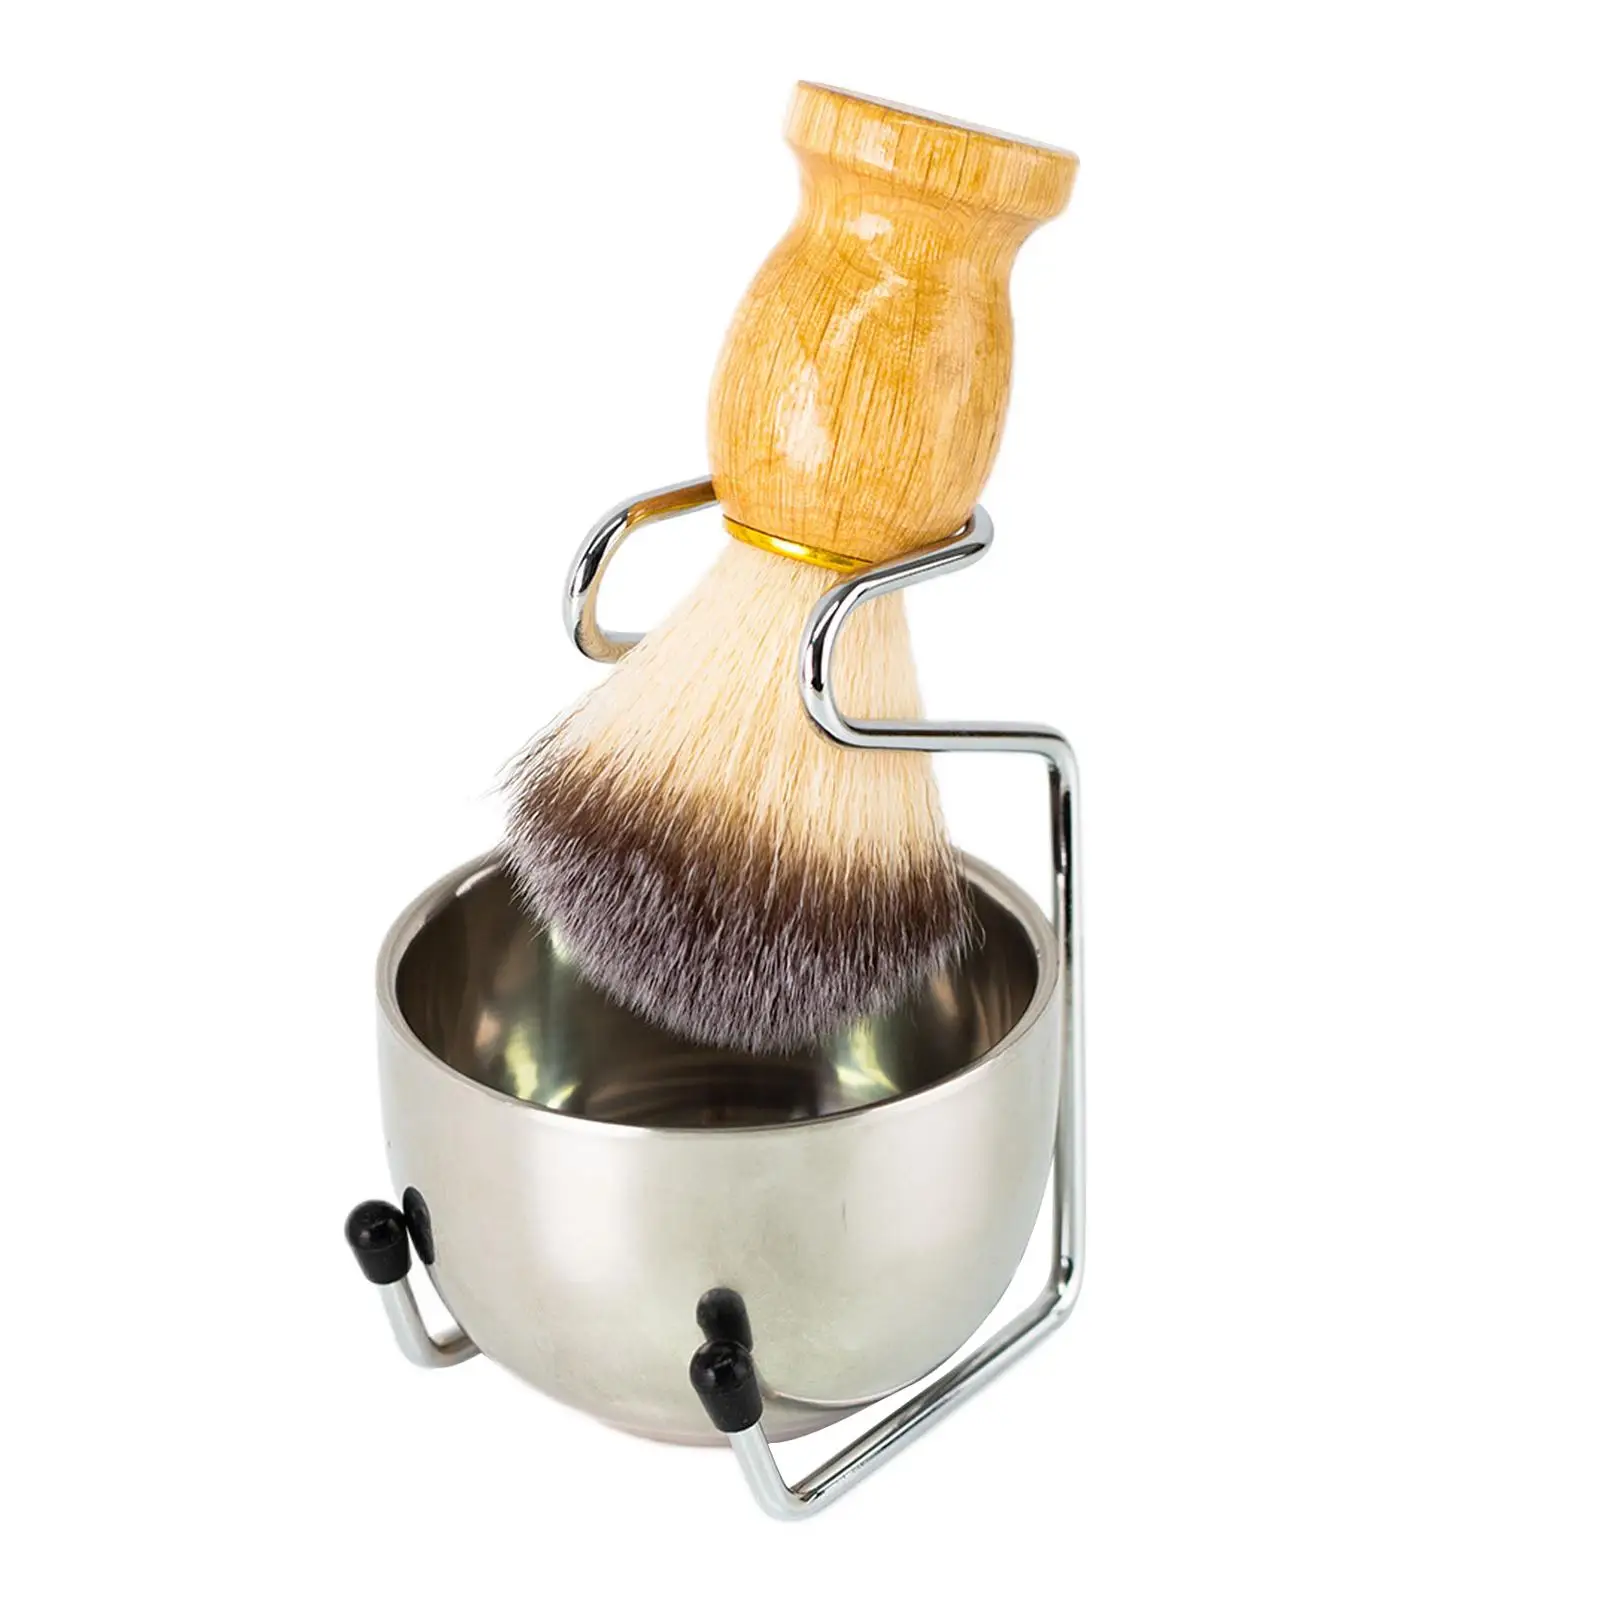 Stainless Steel Shaving   Brush, Easy to Install Perfect Gift for Your Father Husband Boyfriend Durable Accessories